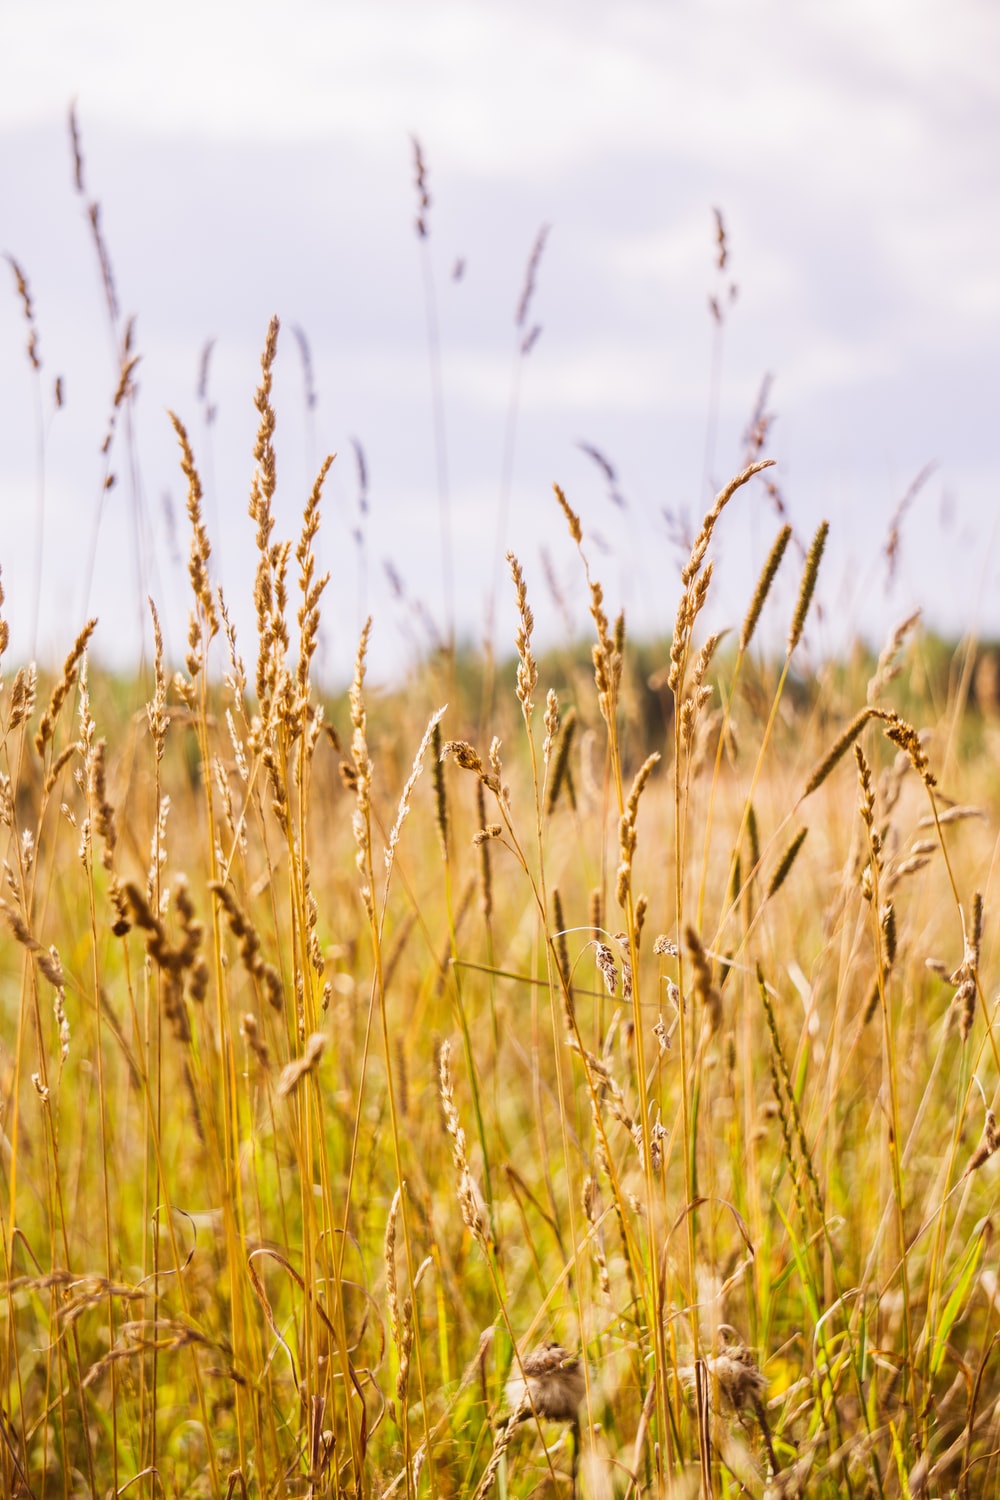 Dry Grass Picture. Download Free Image